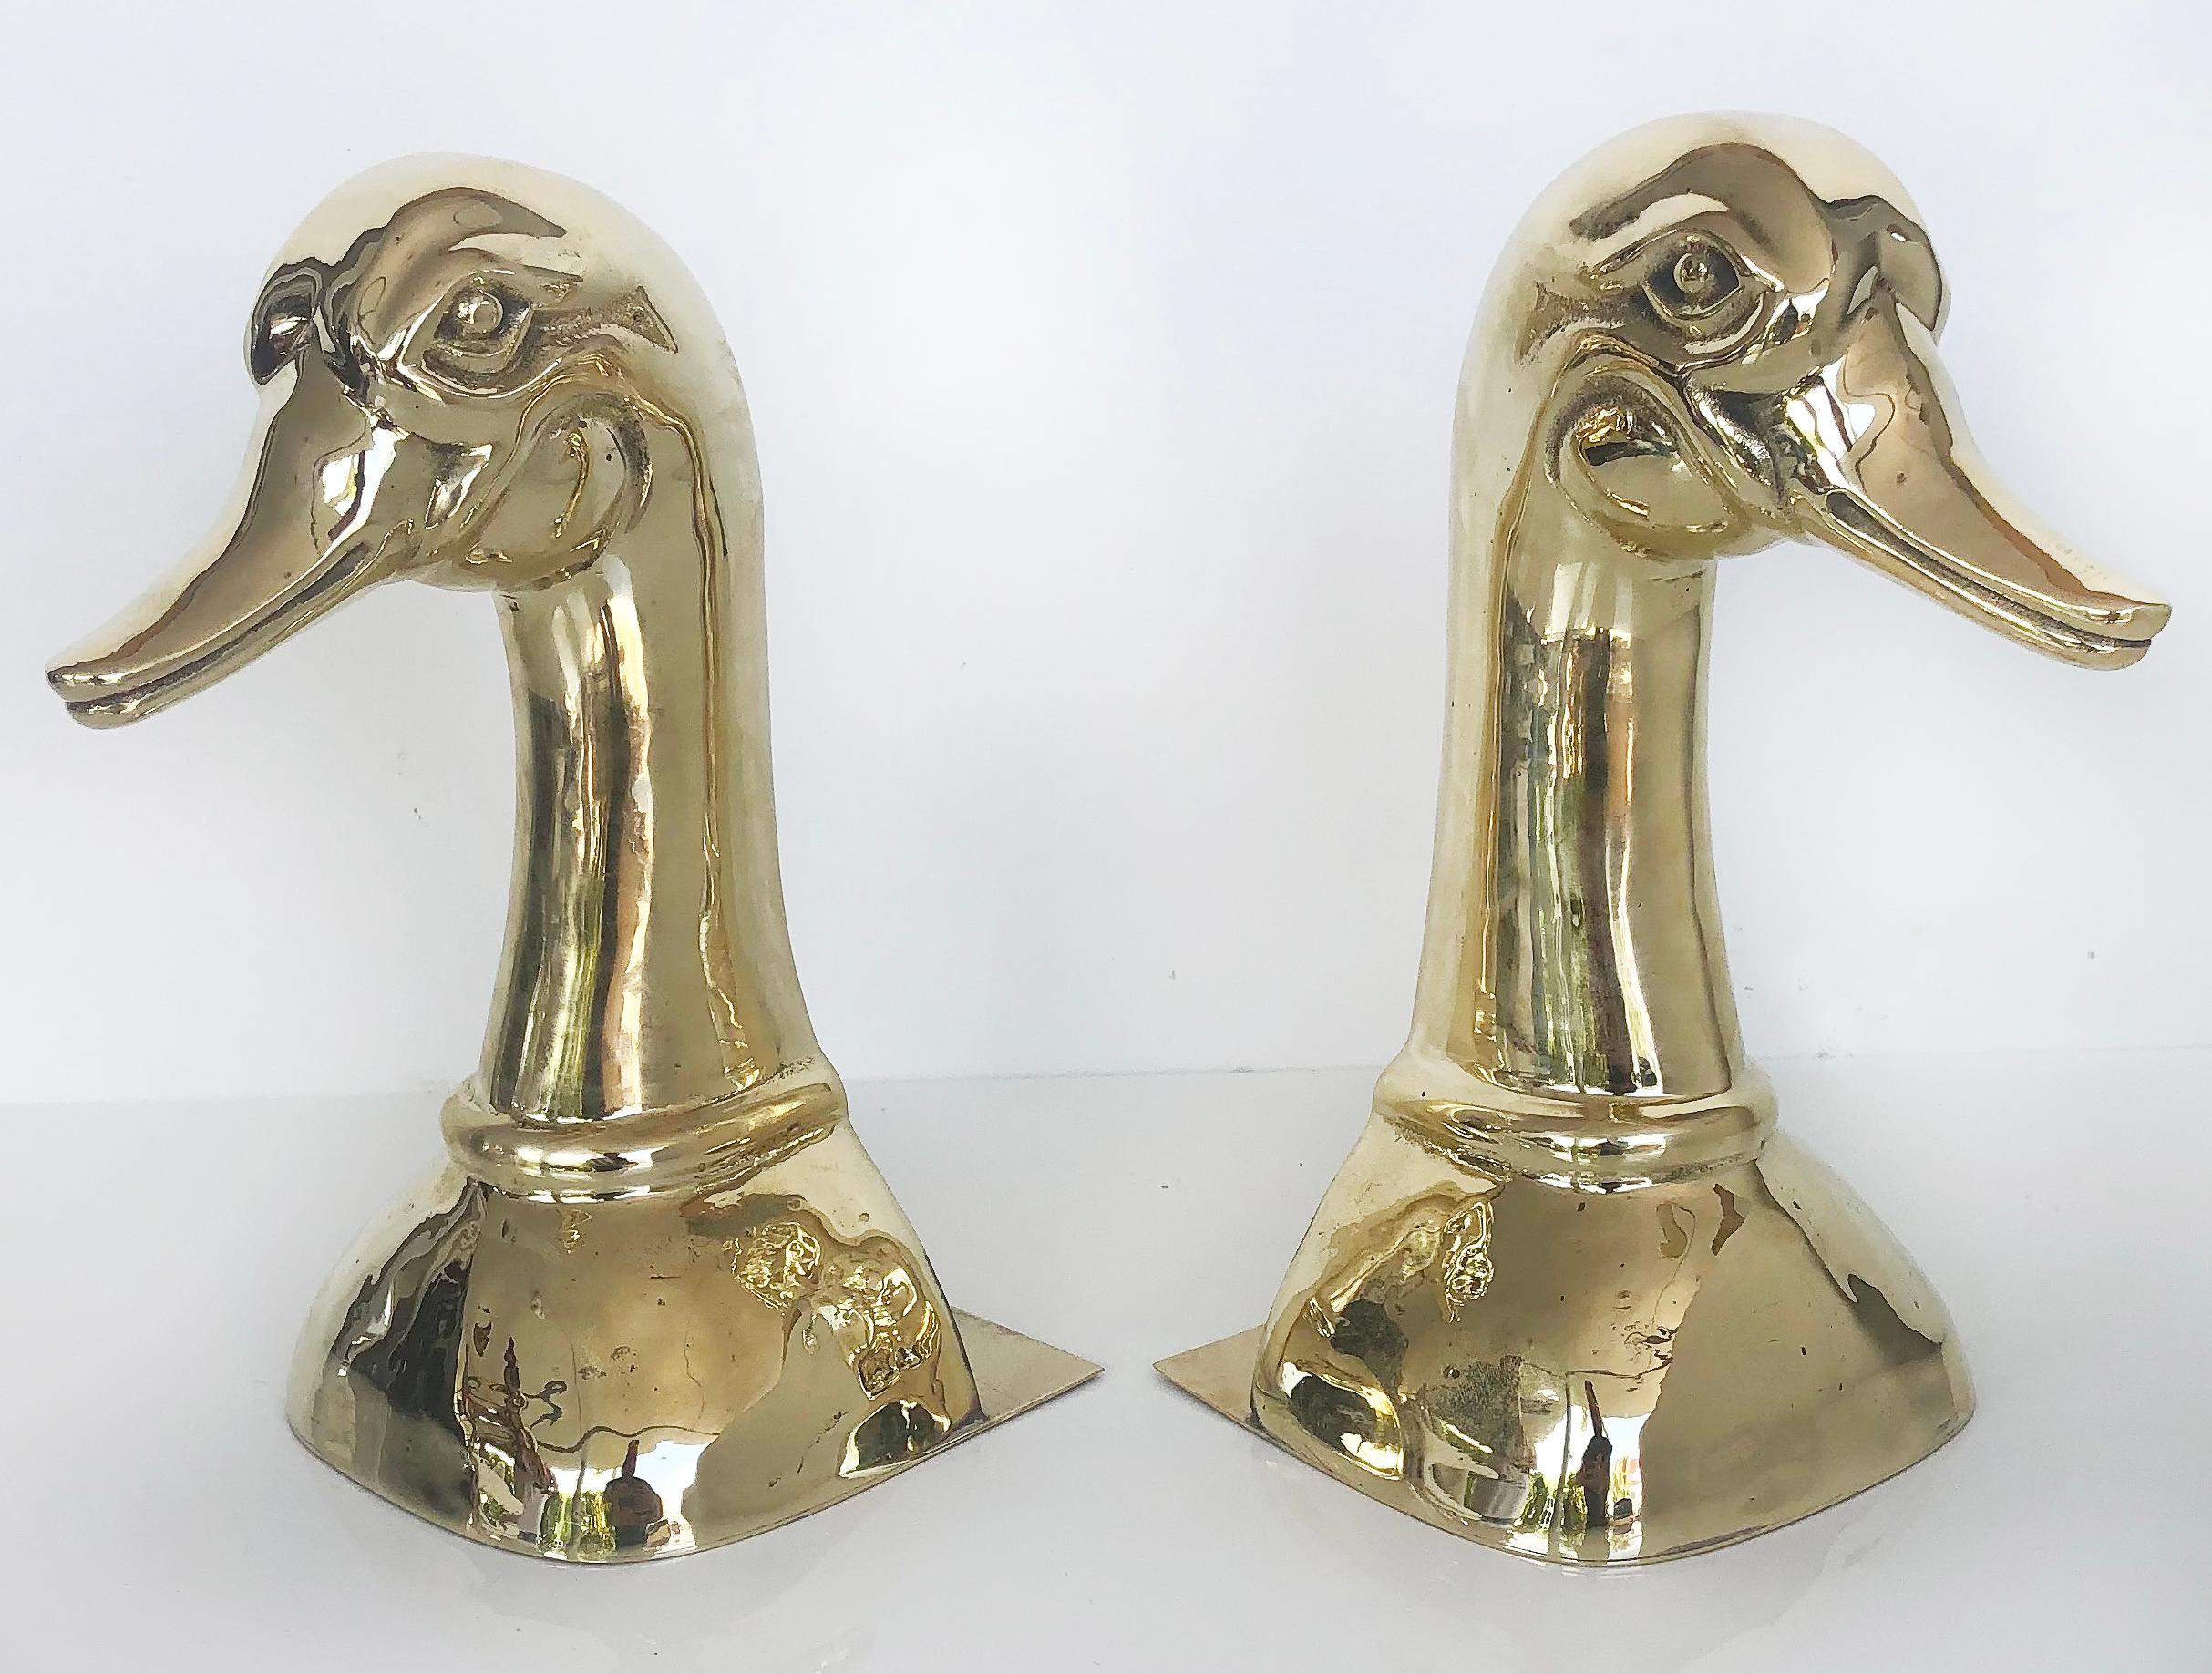 Polished Brass Duck head bookends, pair

Offred for ale is a pair of vintage classic Duck Head bookends in polished brass. These will be an elegant addition for your desk or bookshelves.